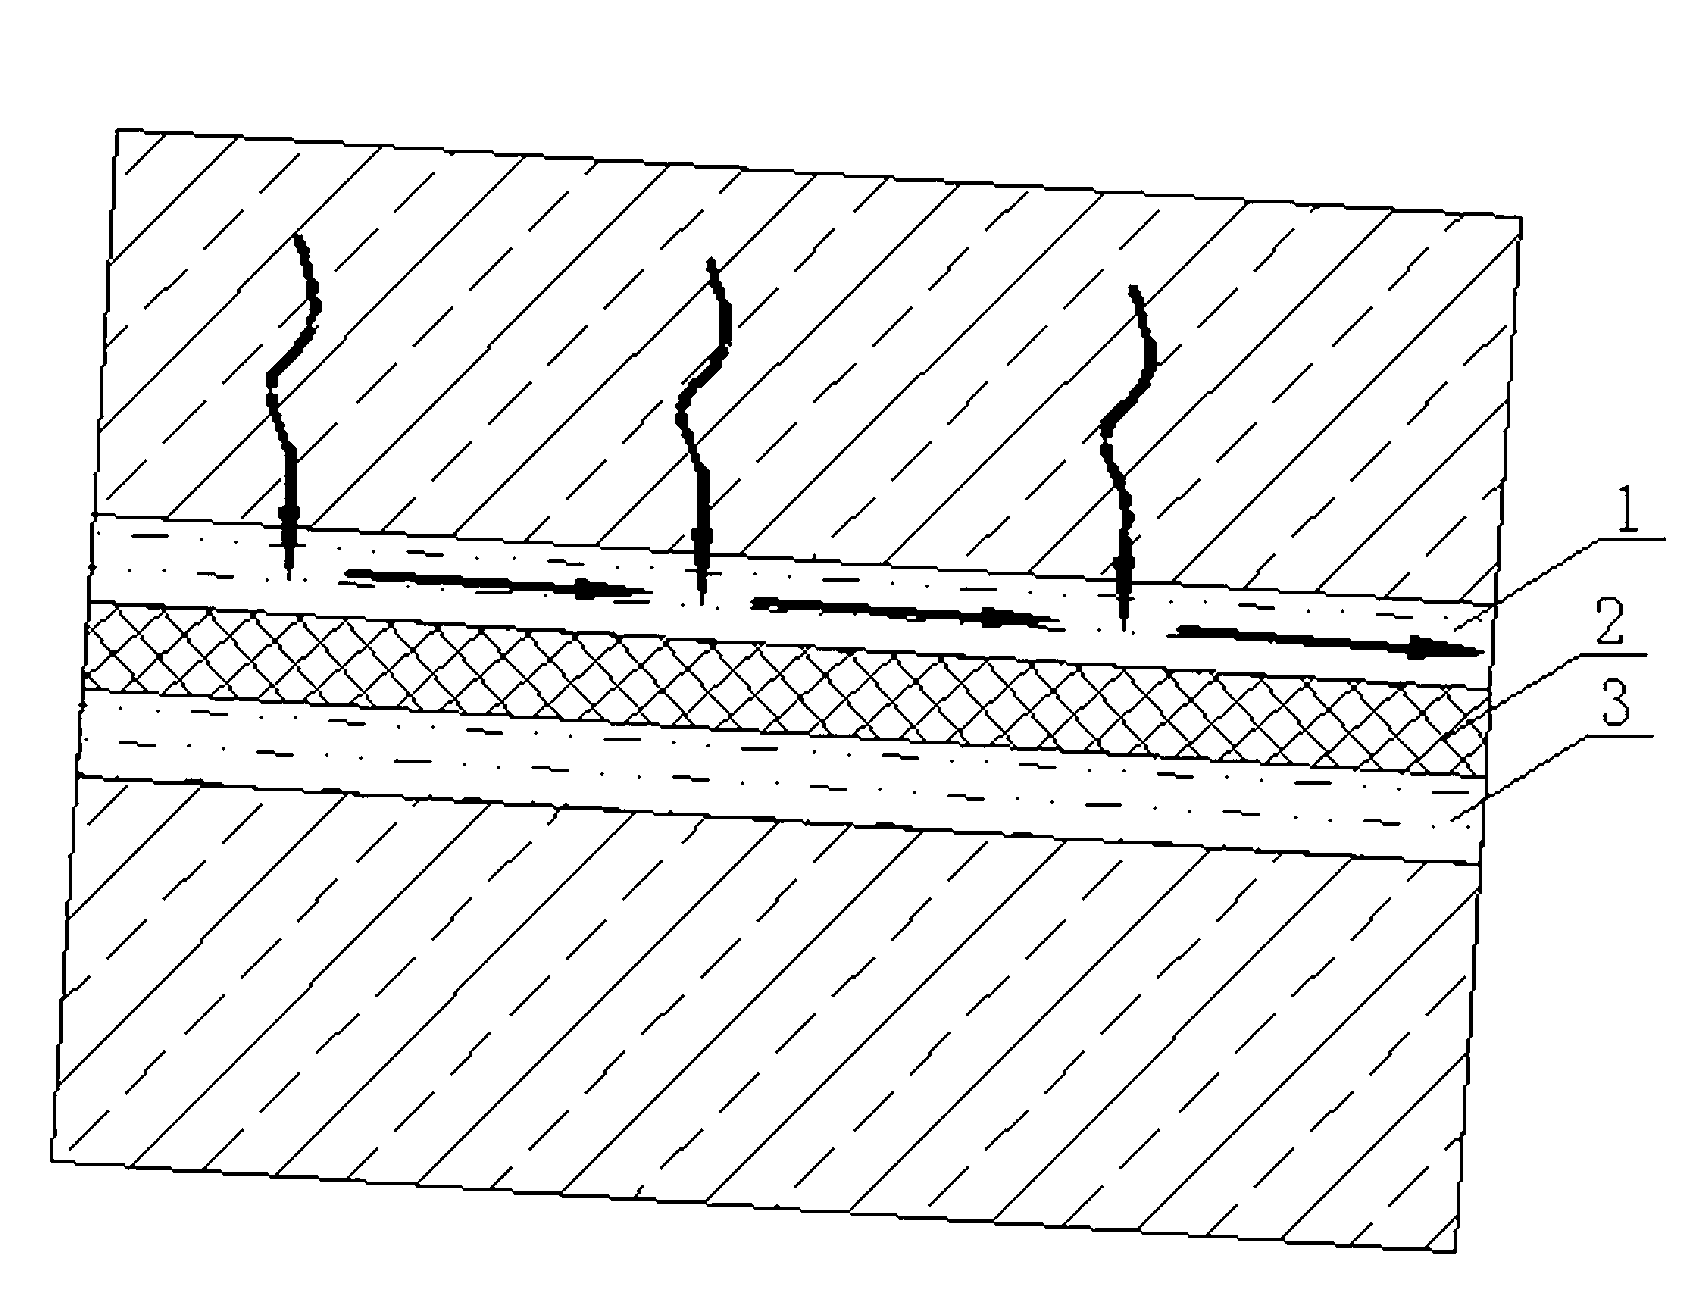 Composite geotextile material capillary barrier draining structure and unsaturated loess embankment structure